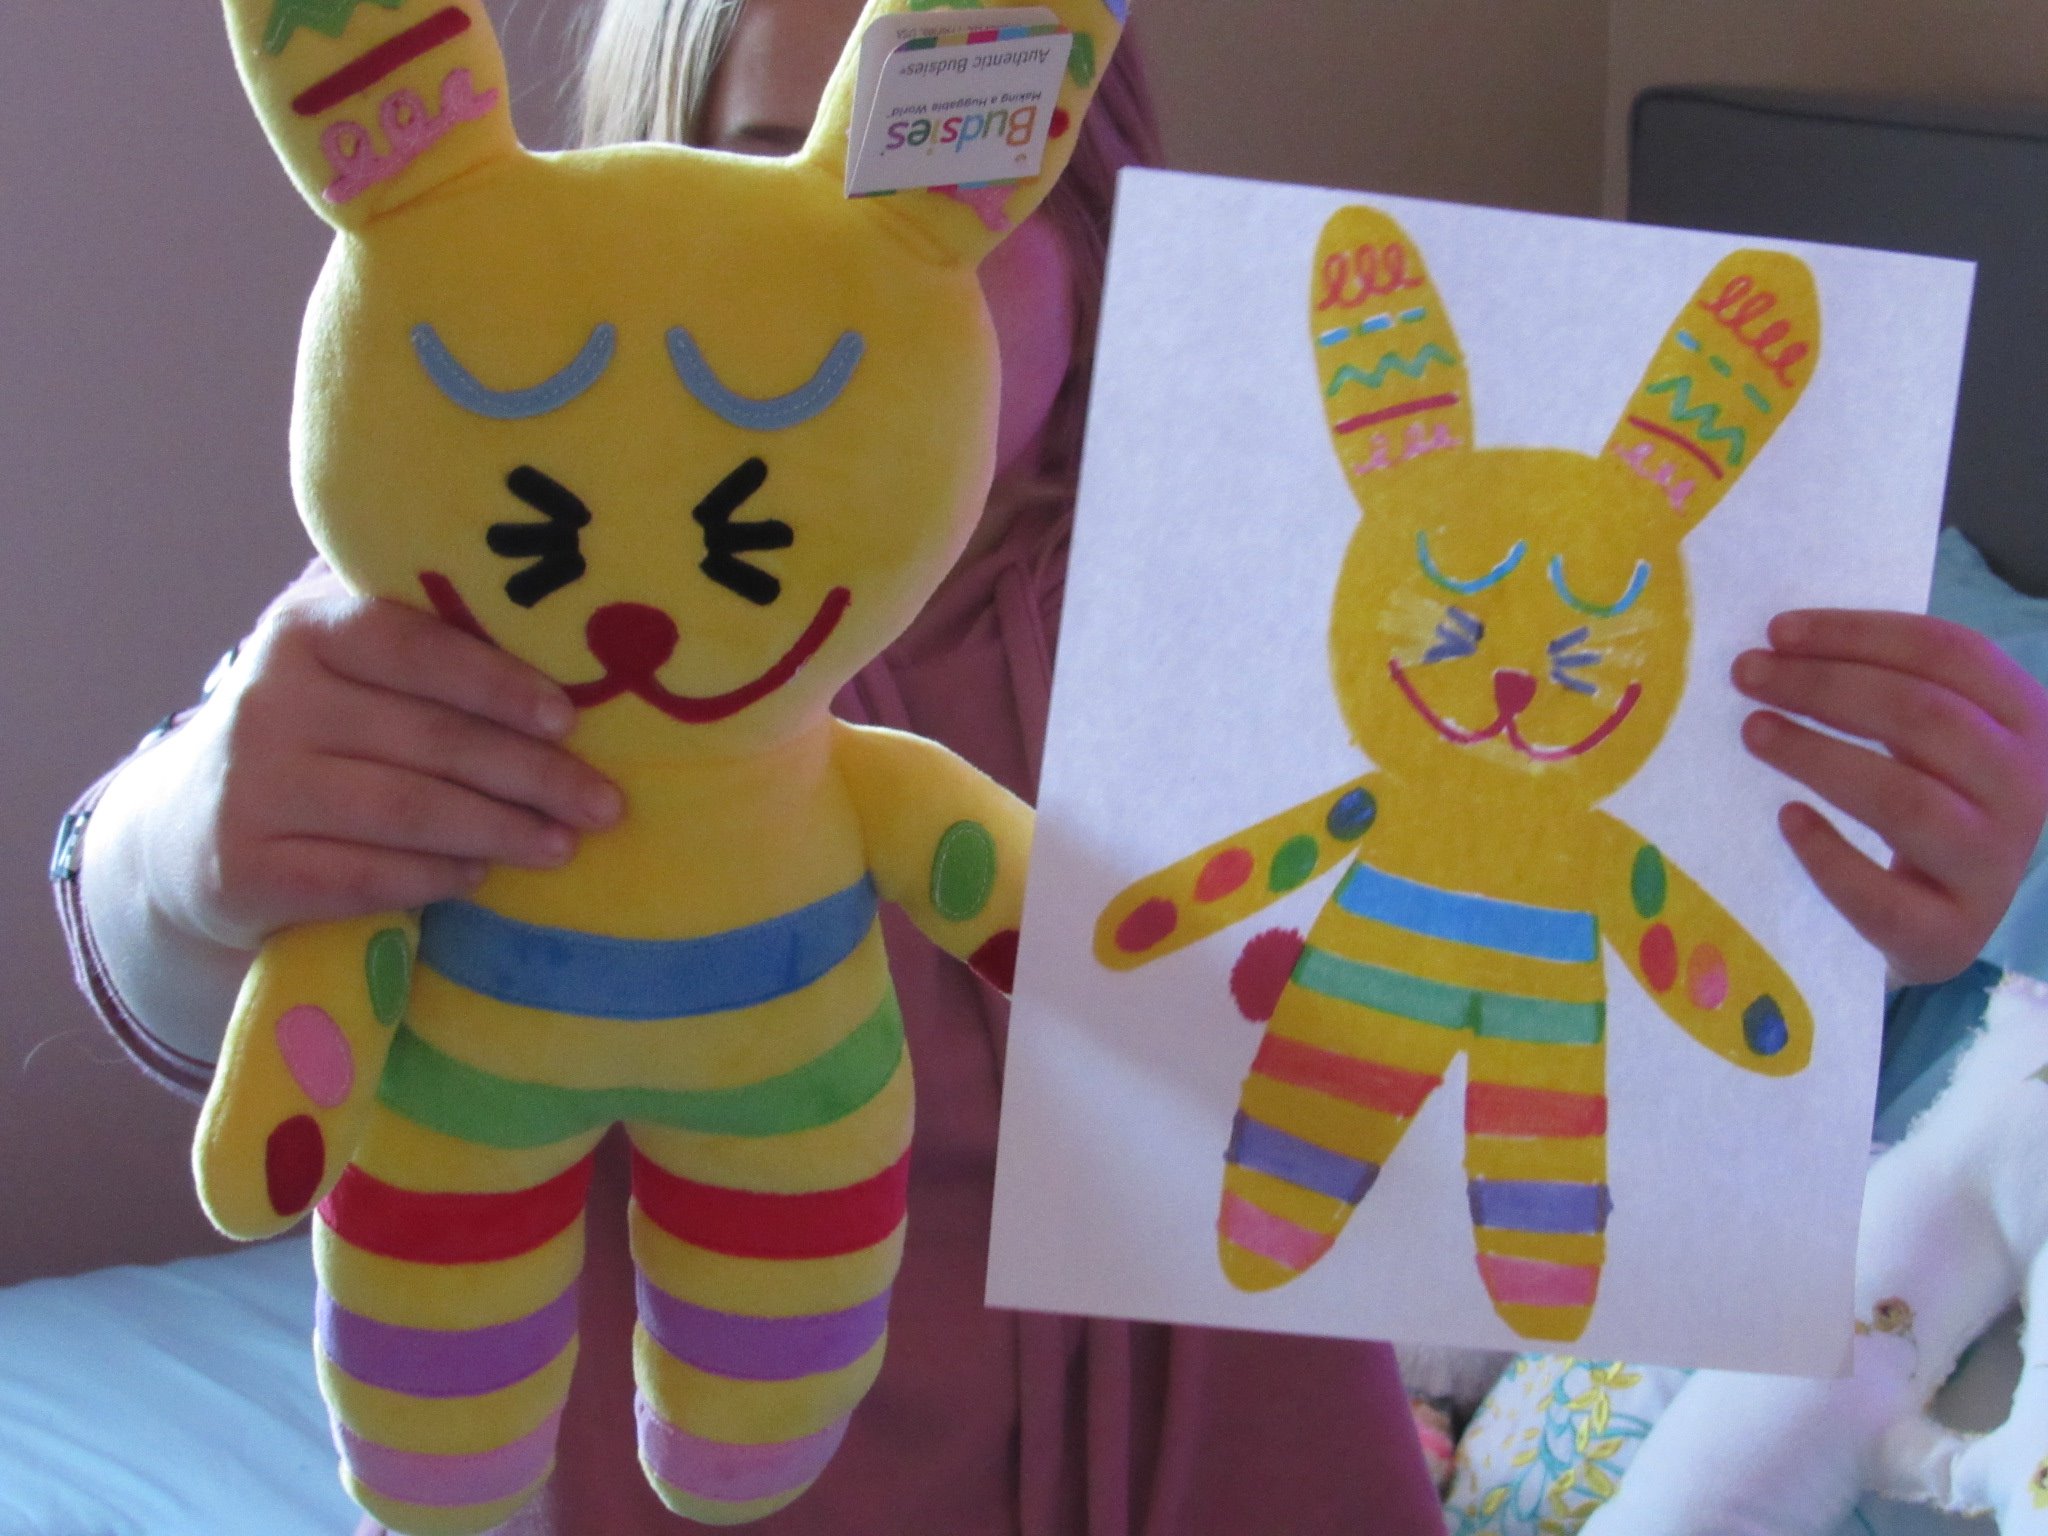 Easter Gift Idea, Custom Stuffed Animals From a Drawing